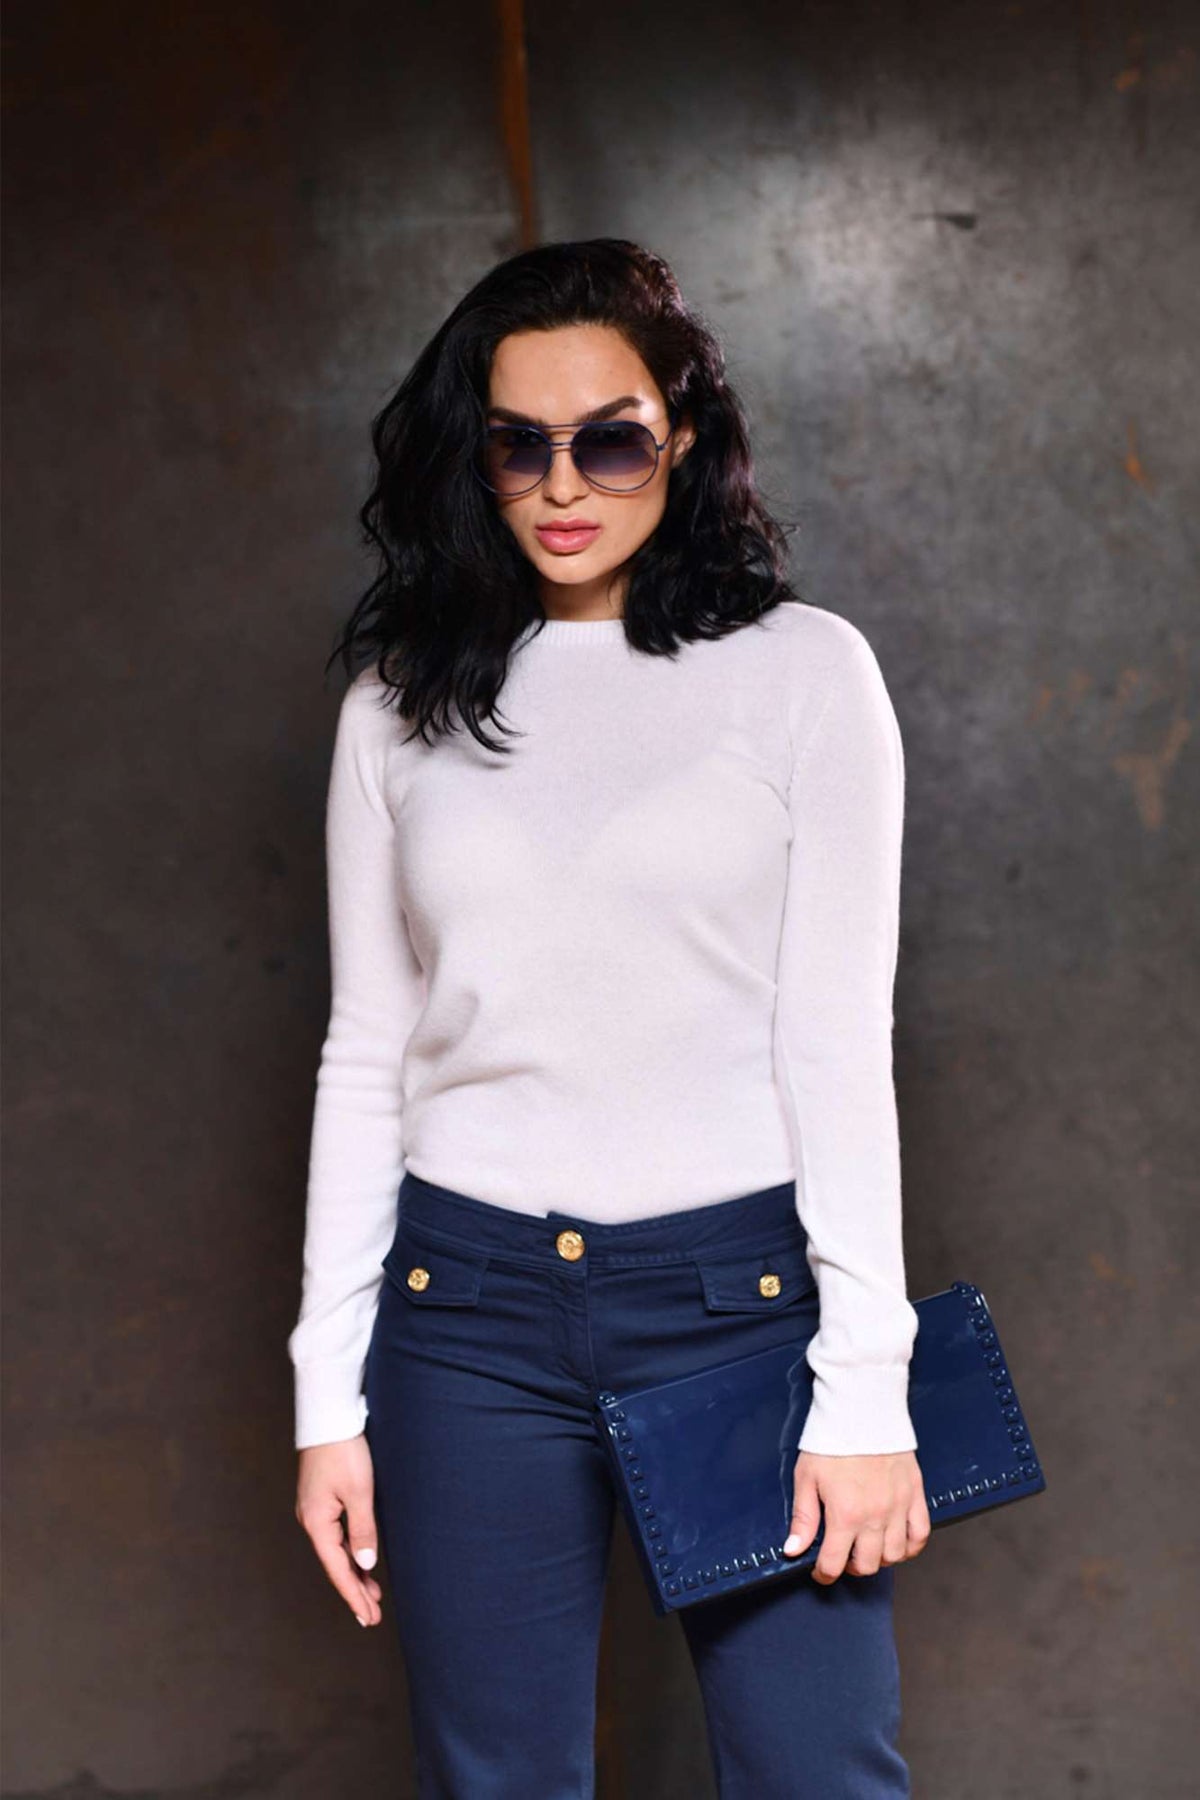 Girl wearing a white cashmere sweater with navy blue aviator sunglasses and jelly purse in navy blue